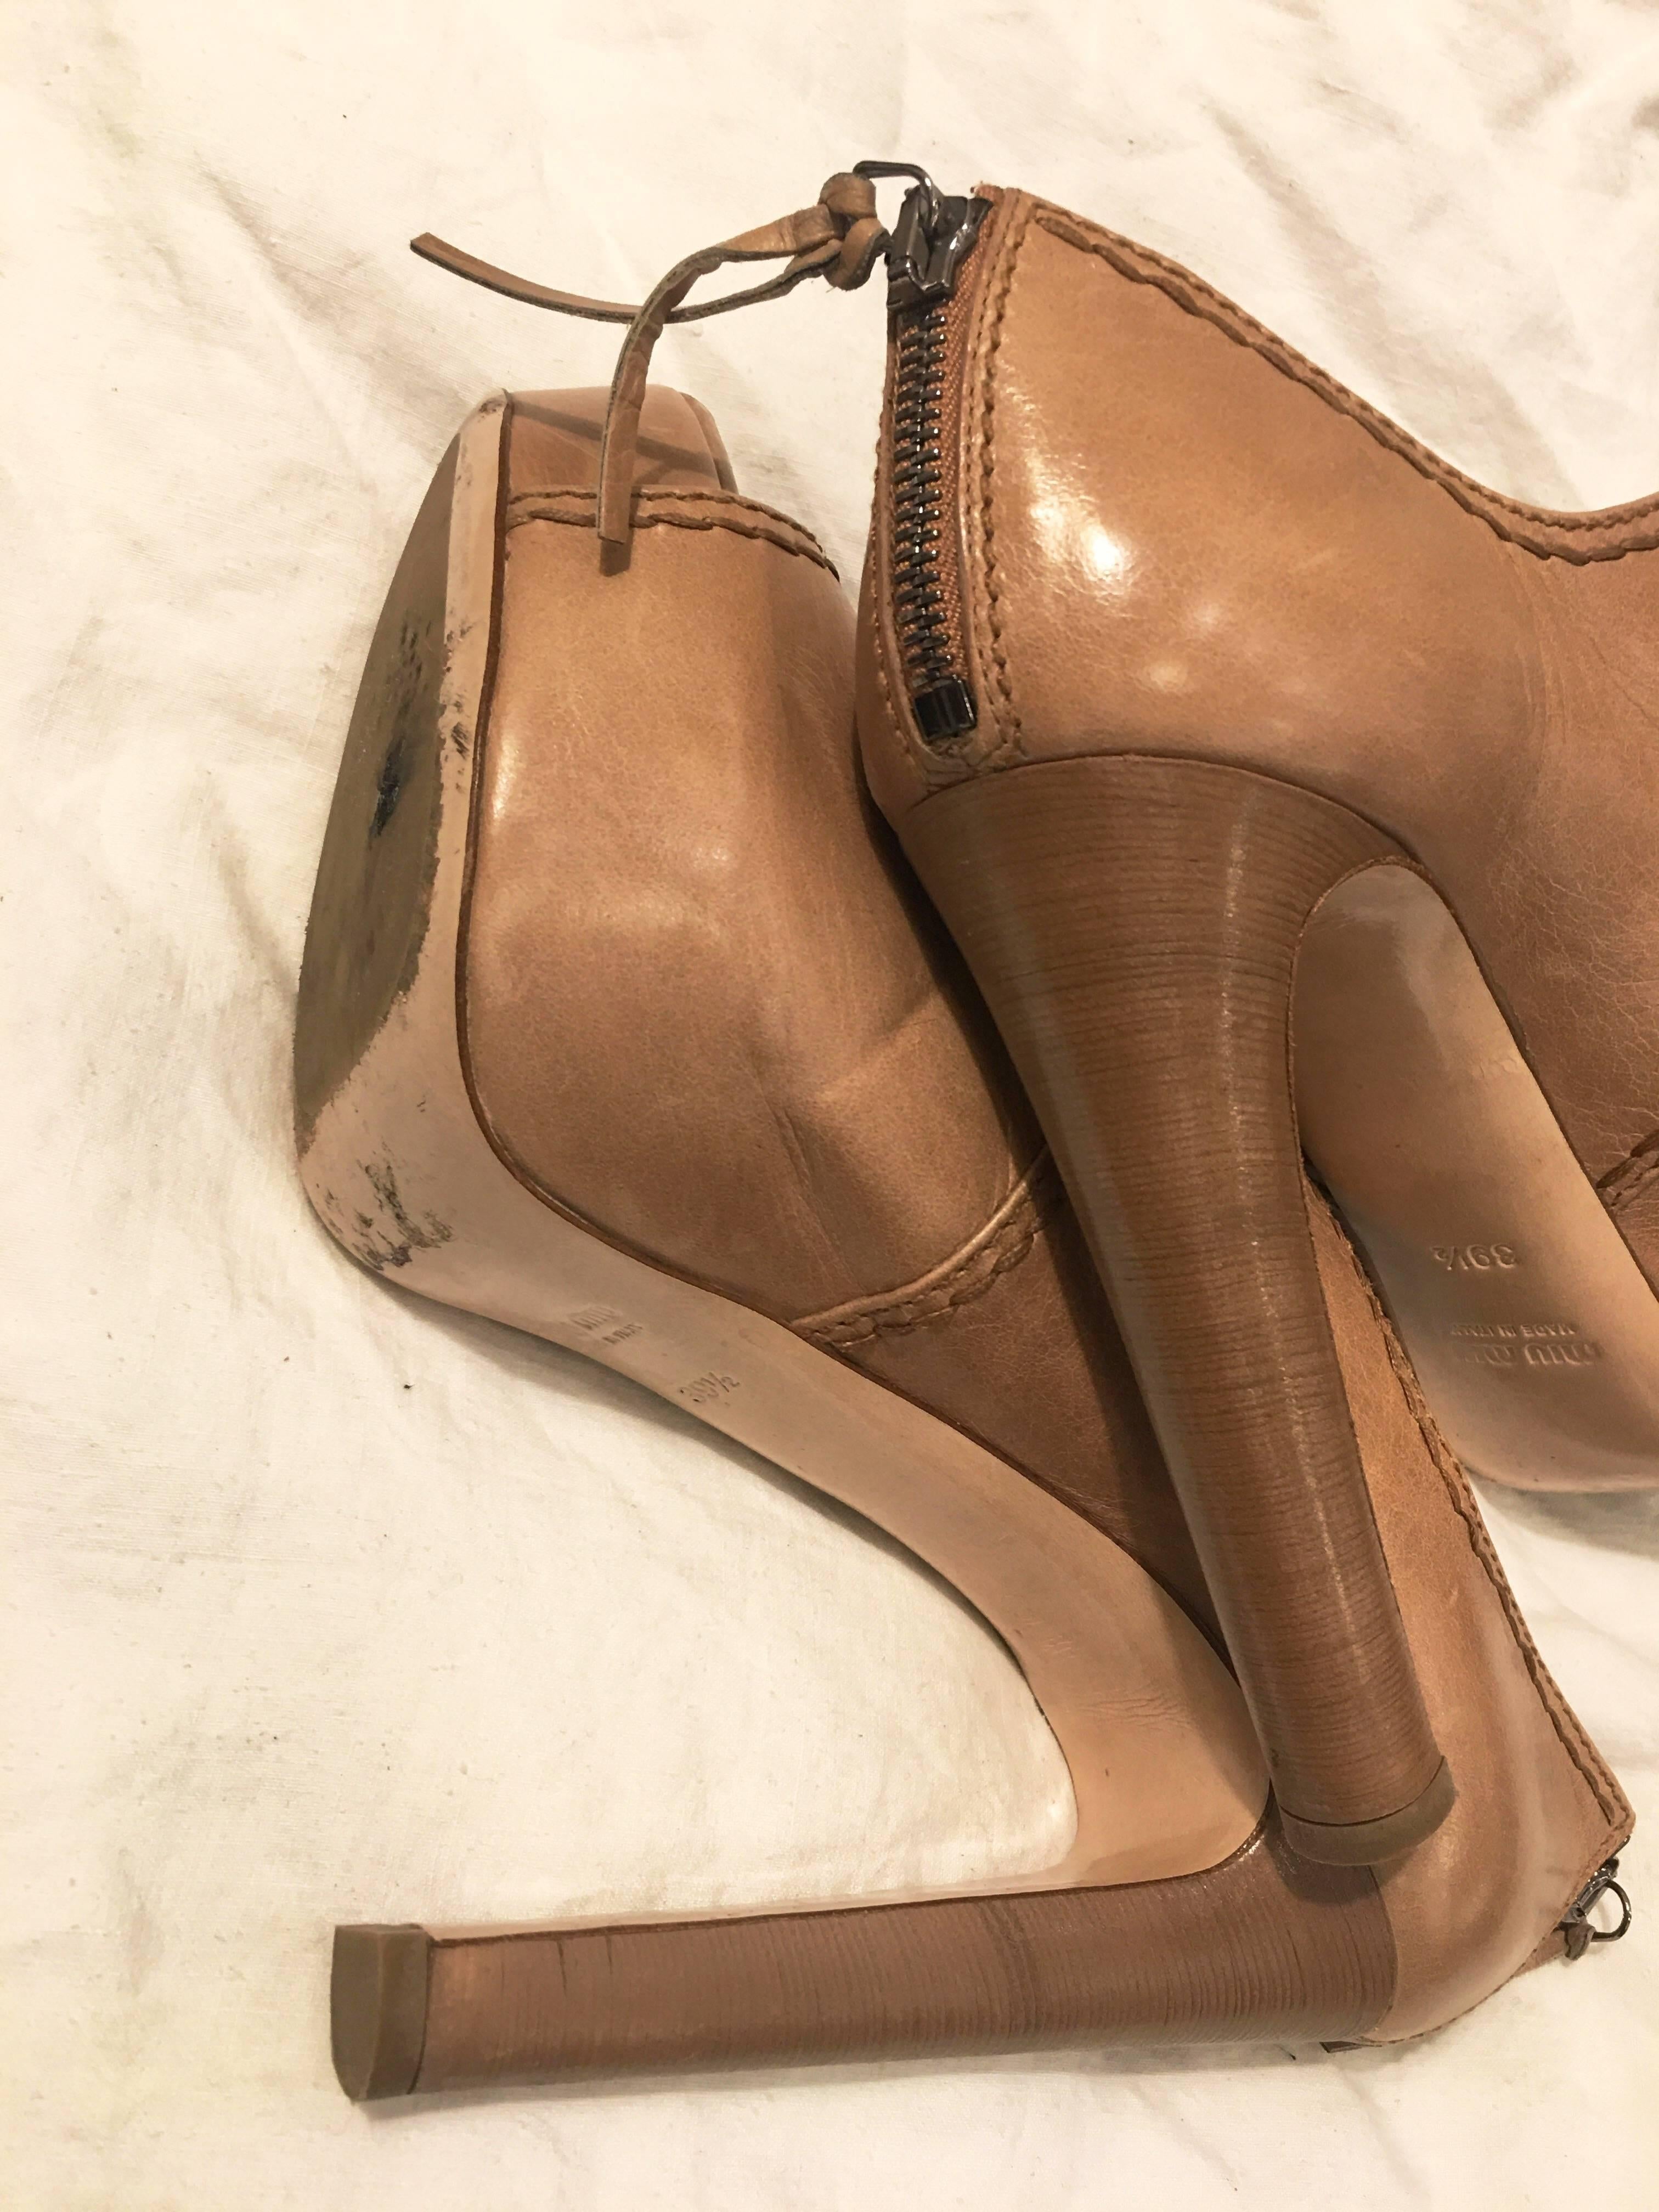 Women's Miu Miu Beige “Mary Jane” Open Toe with Bow Pumps For Sale